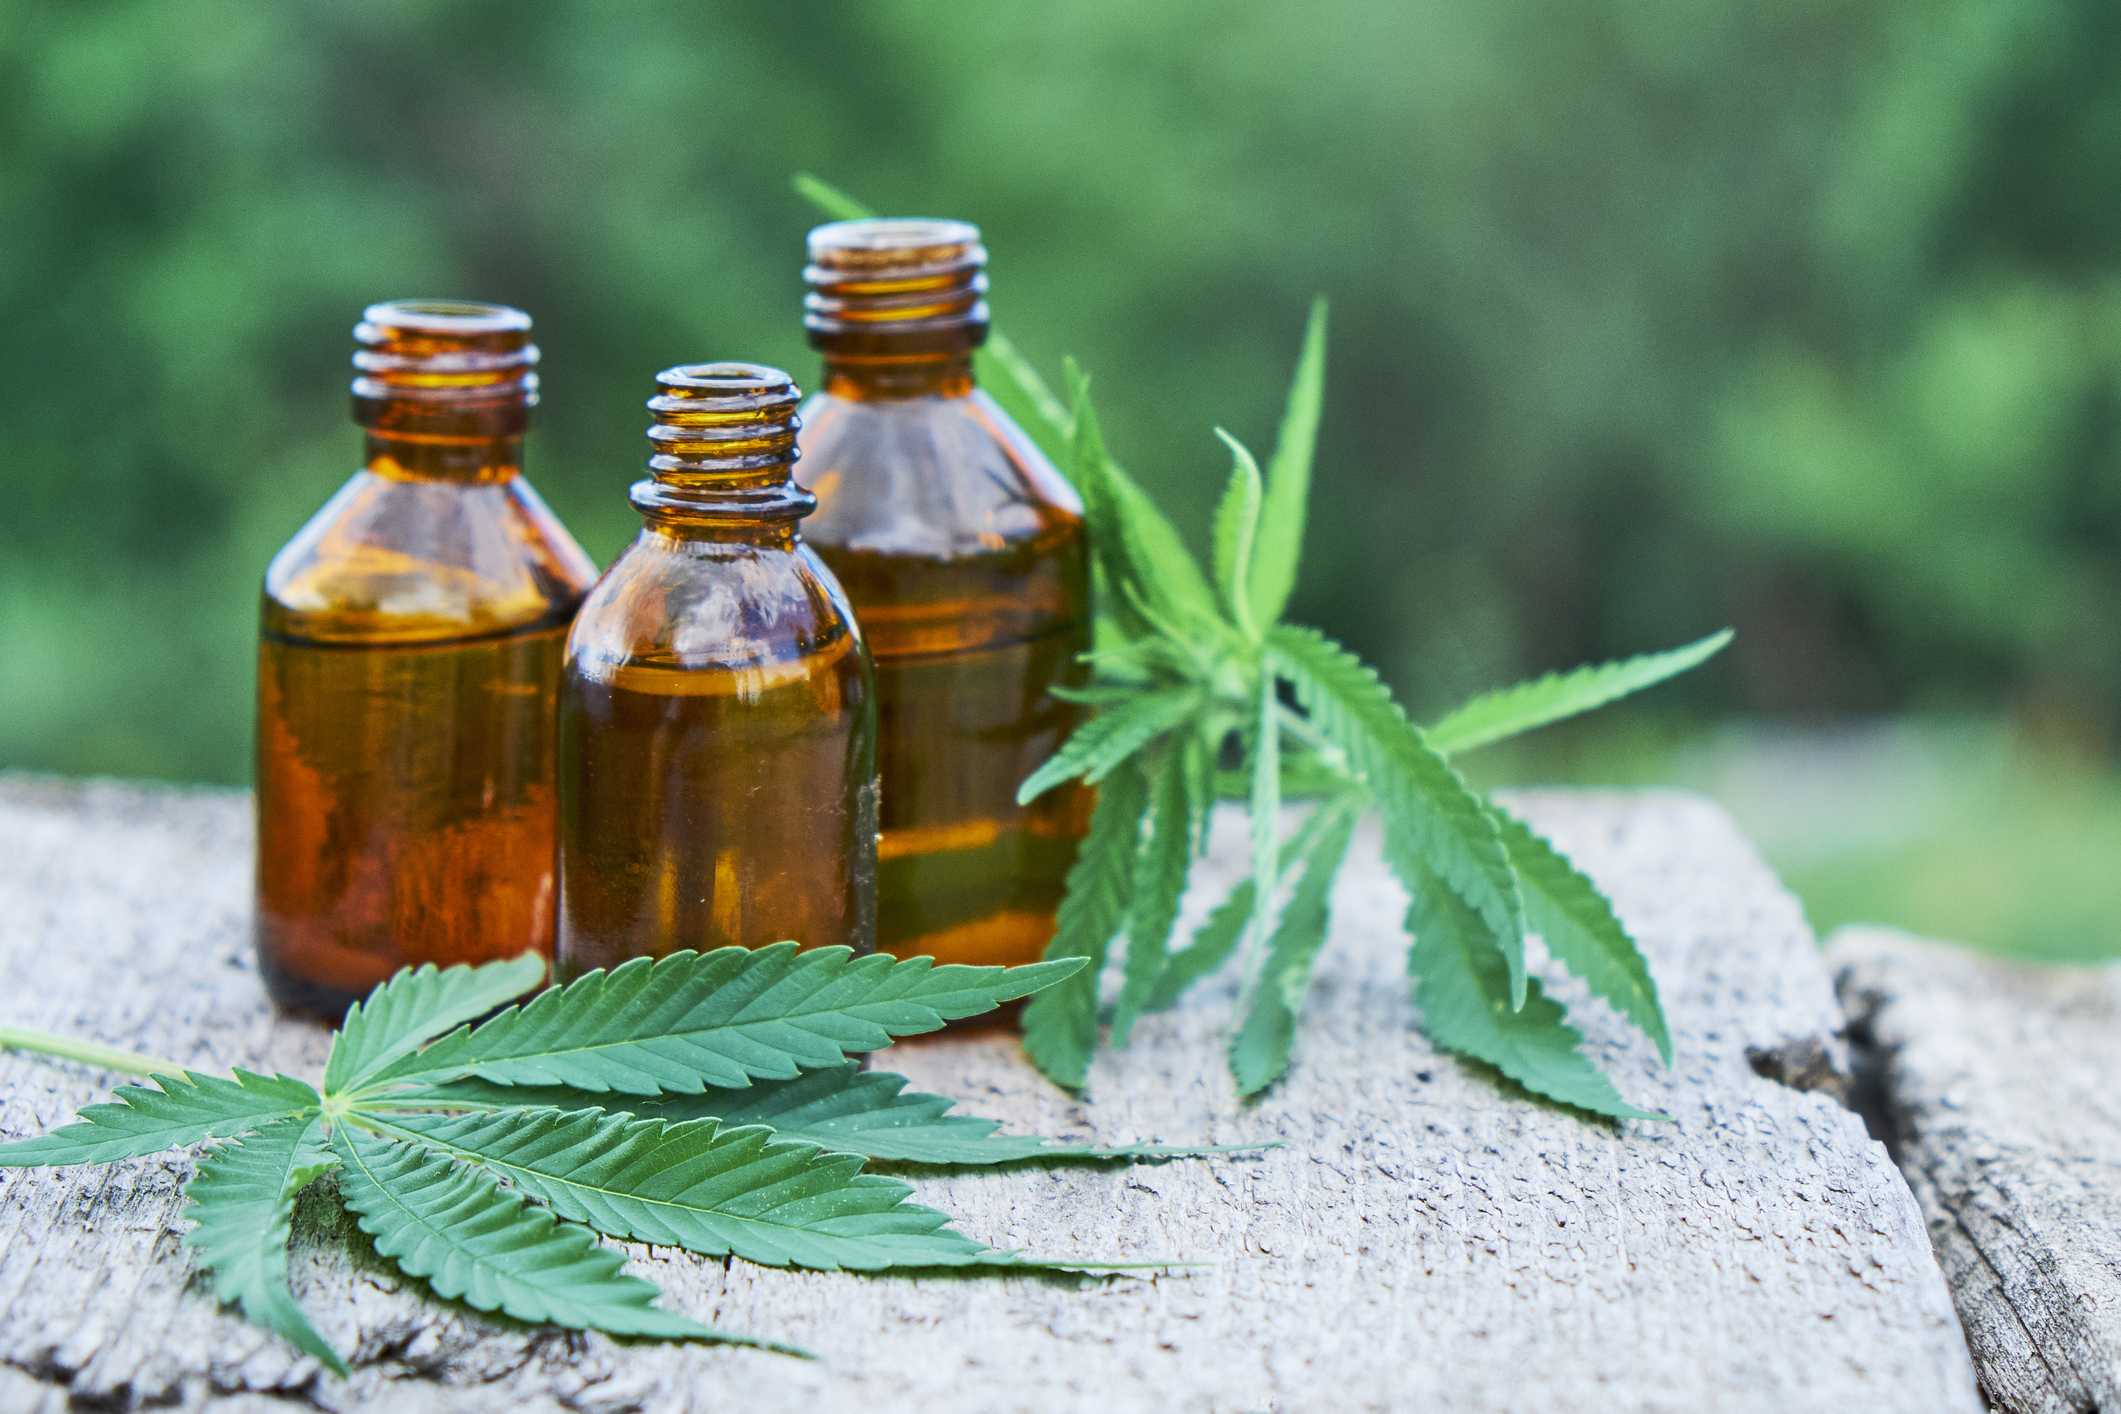 Which Is Best? Cbd Oil Or Himp Oil - Cbd|Oil|Cannabidiol|Products|View|Abstract|Effects|Hemp|Cannabis|Product|Thc|Pain|People|Health|Body|Plant|Cannabinoids|Medications|Oils|Drug|Benefits|System|Study|Marijuana|Anxiety|Side|Research|Effect|Liver|Quality|Treatment|Studies|Epilepsy|Symptoms|Gummies|Compounds|Dose|Time|Inflammation|Bottle|Cbd Oil|View Abstract|Side Effects|Cbd Products|Endocannabinoid System|Multiple Sclerosis|Cbd Oils|Cbd Gummies|Cannabis Plant|Hemp Oil|Cbd Product|Hemp Plant|United States|Cytochrome P450|Many People|Chronic Pain|Nuleaf Naturals|Royal Cbd|Full-Spectrum Cbd Oil|Drug Administration|Cbd Oil Products|Medical Marijuana|Drug Test|Heavy Metals|Clinical Trial|Clinical Trials|Cbd Oil Side|Rating Highlights|Wide Variety|Animal Studies